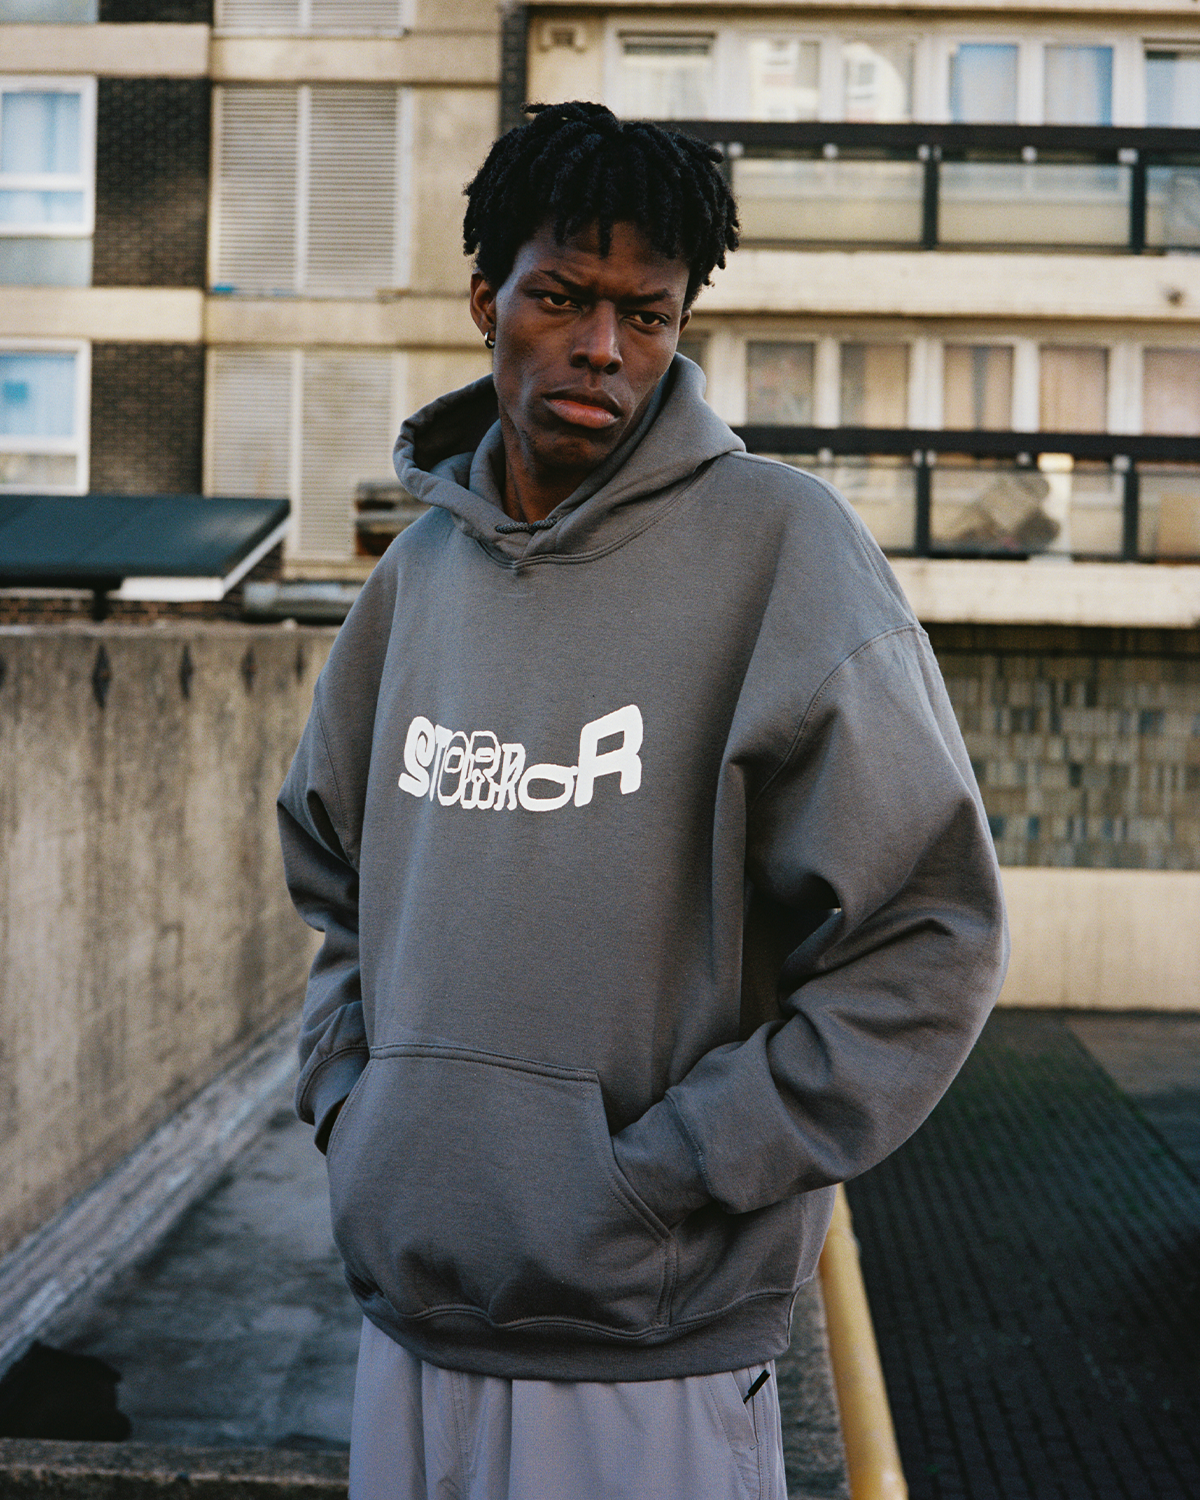 CITY HOODIE | STORROR | parkour clothing & technical sportswear